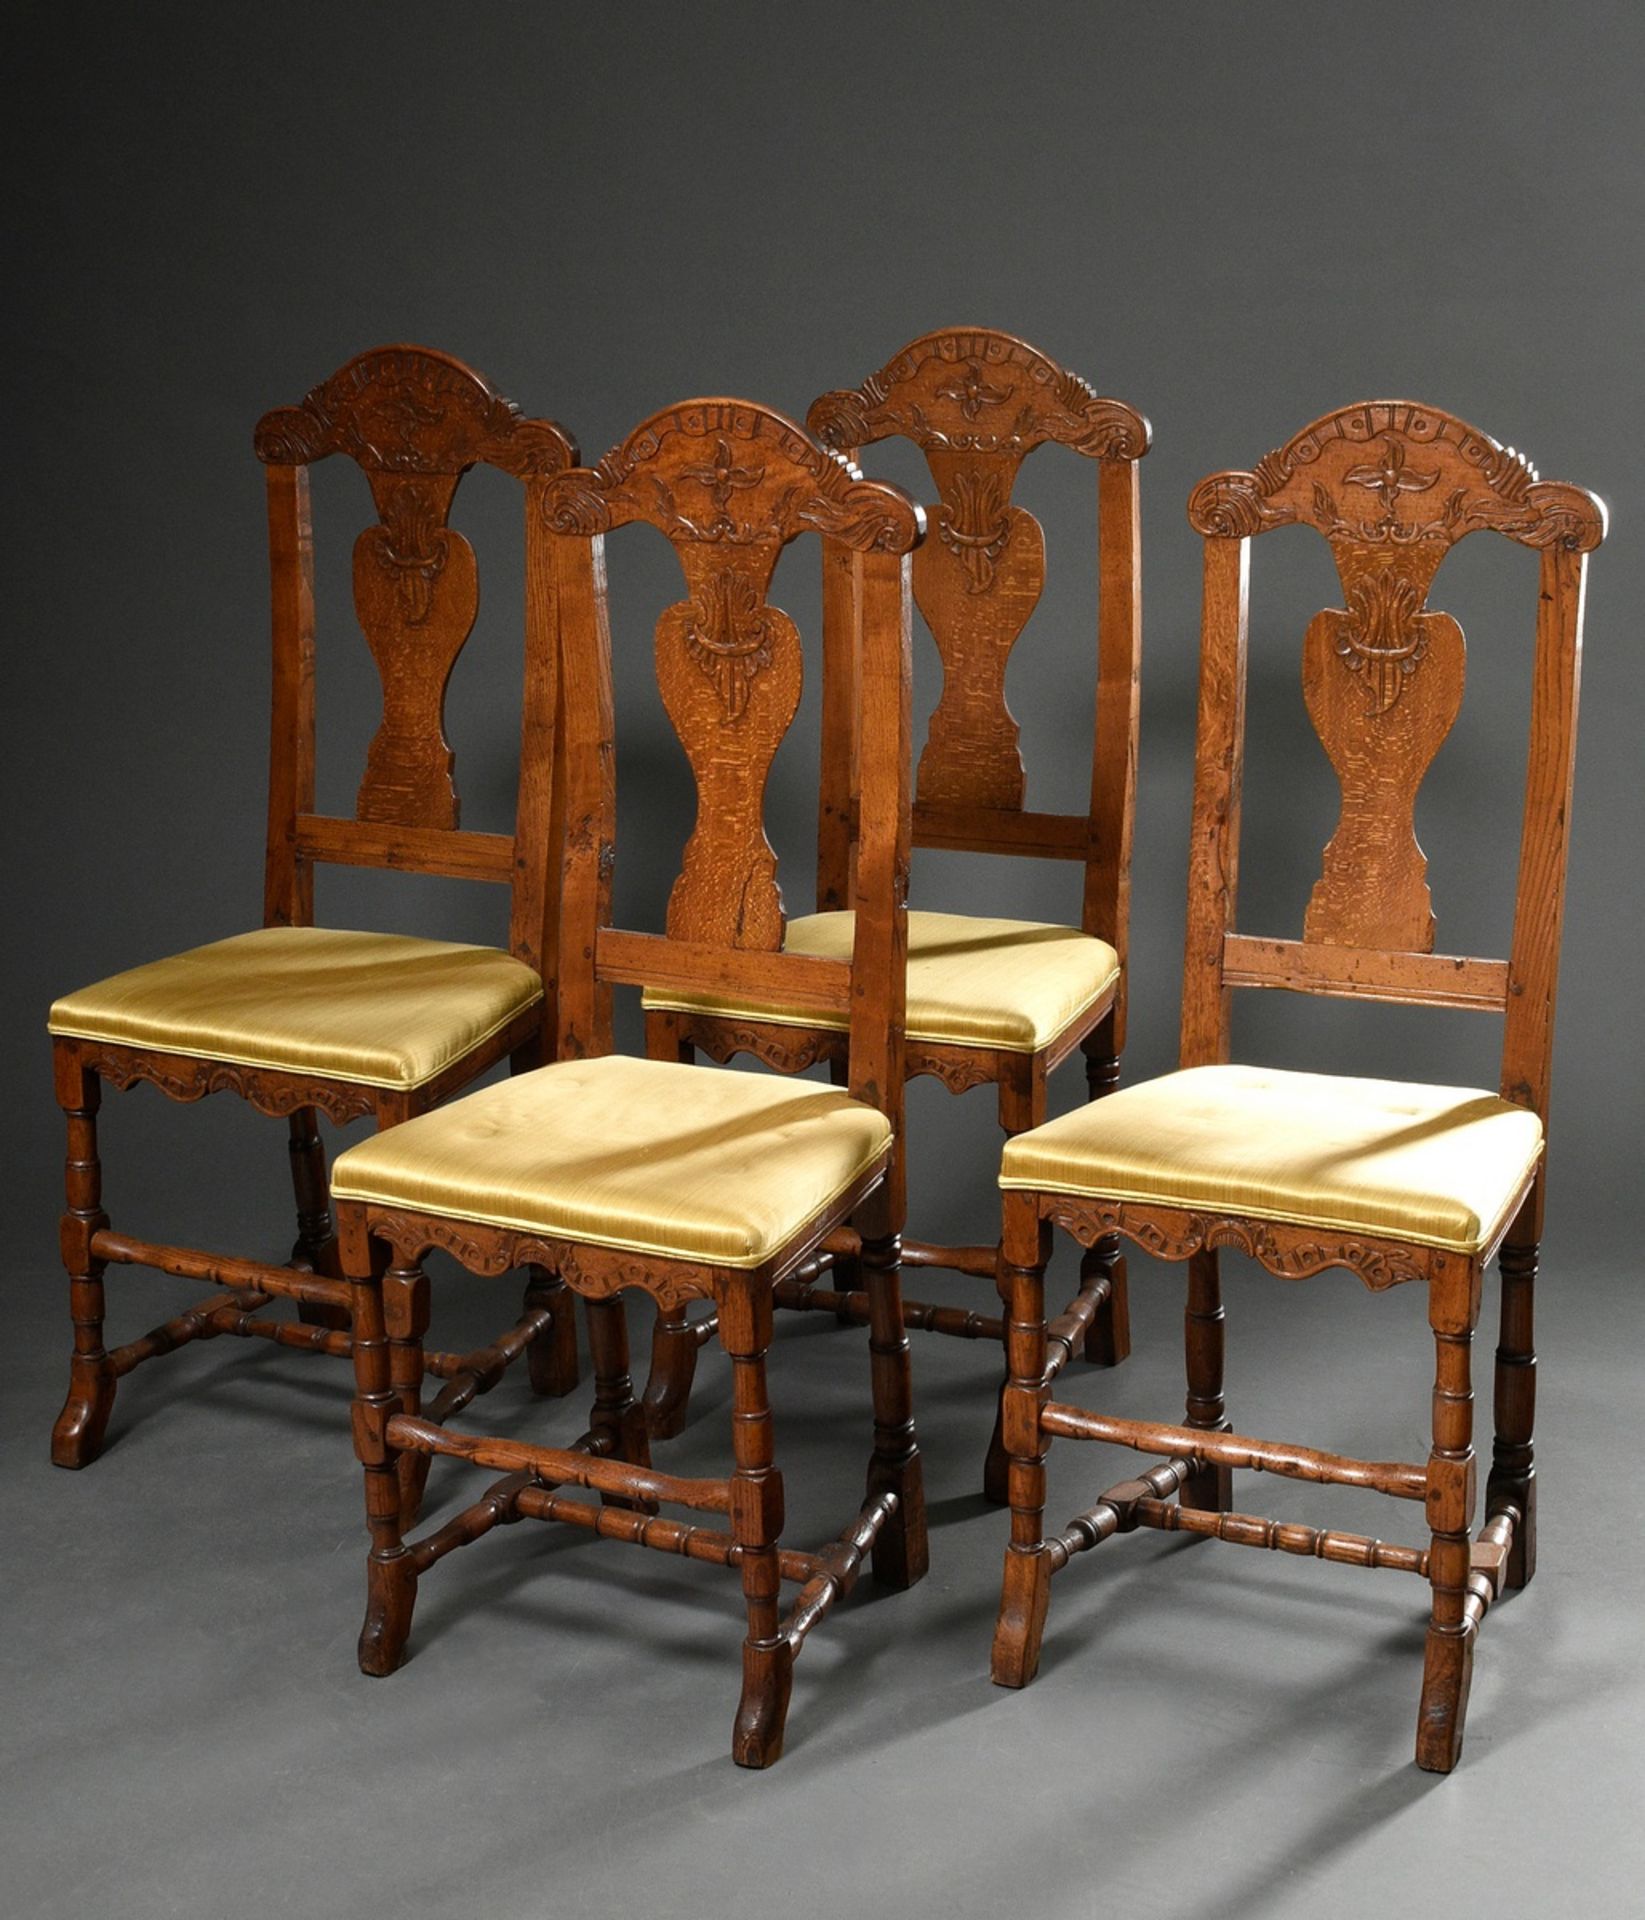 4 Flensburg Baroque chairs with floral carved back board, oak, 1st half 18th c., h. 48/110cm